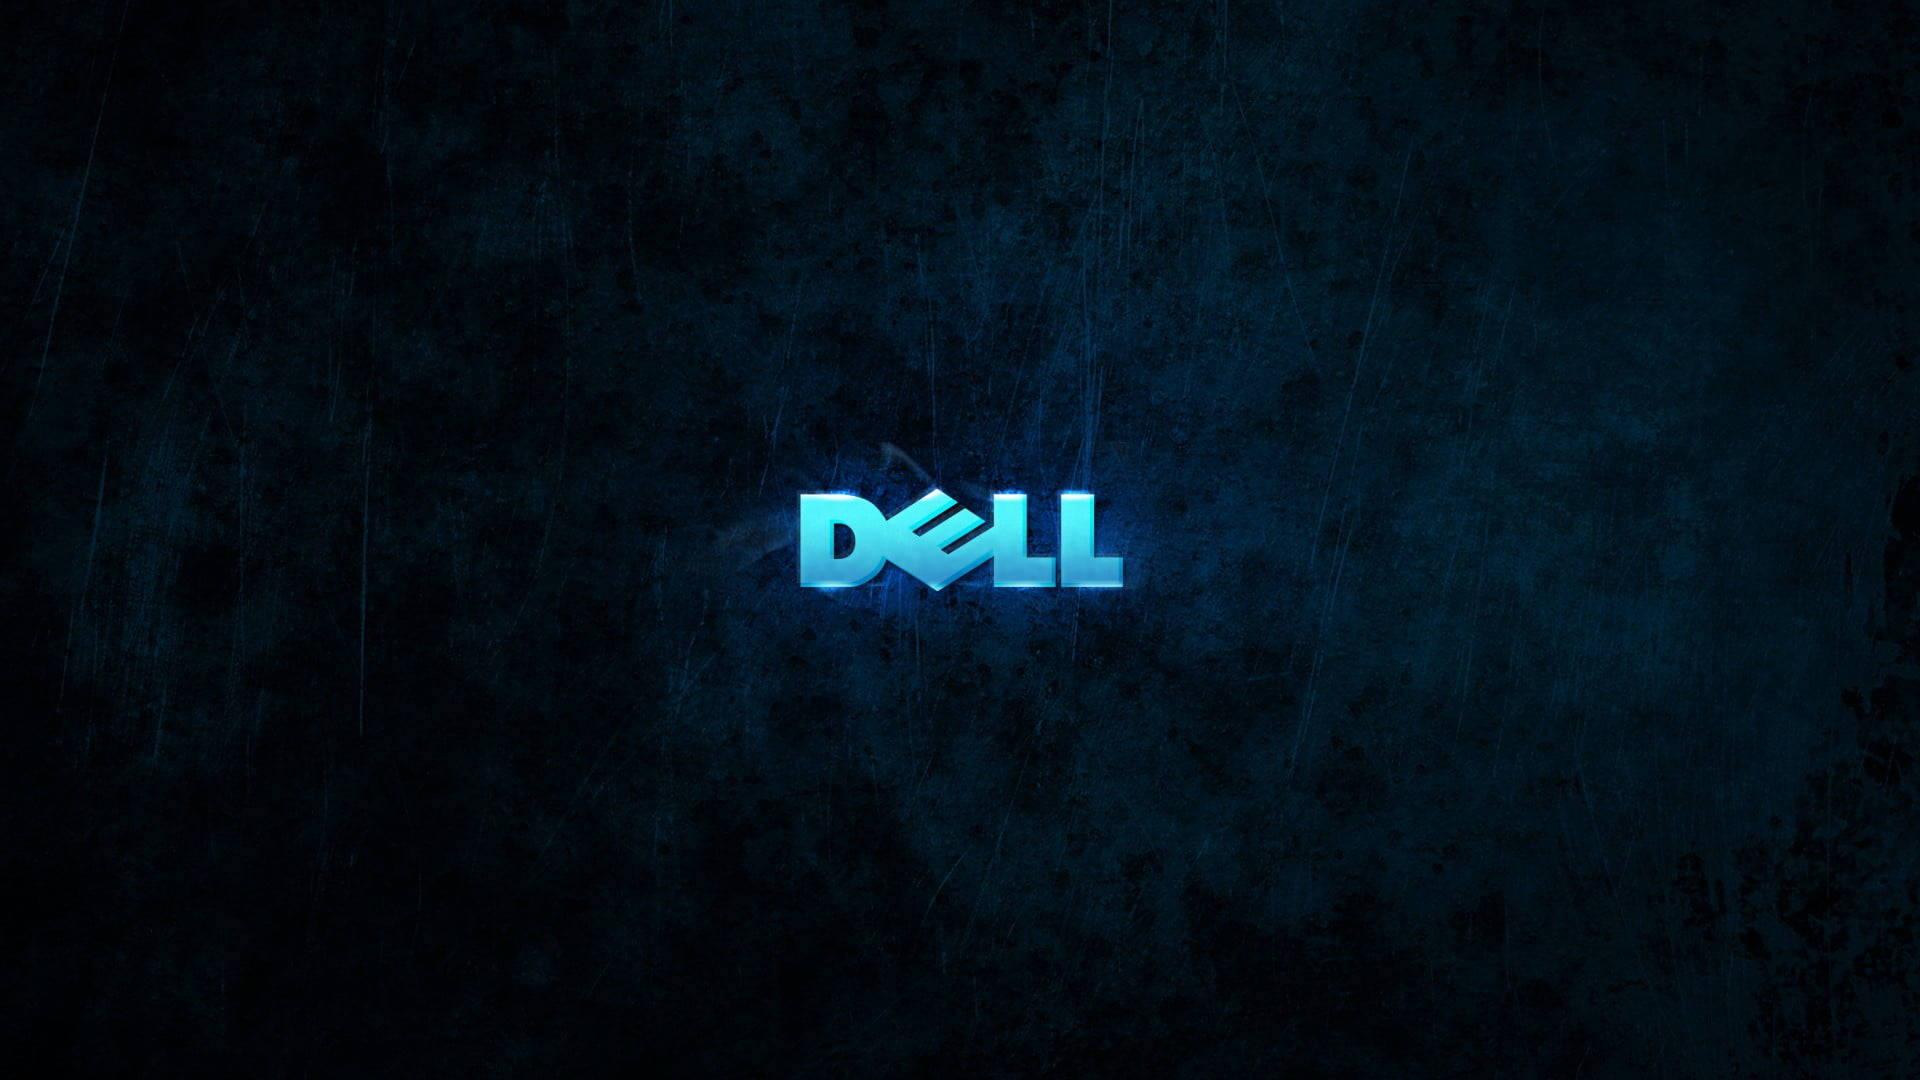 Glowing Blue Dell Laptop Logo Background